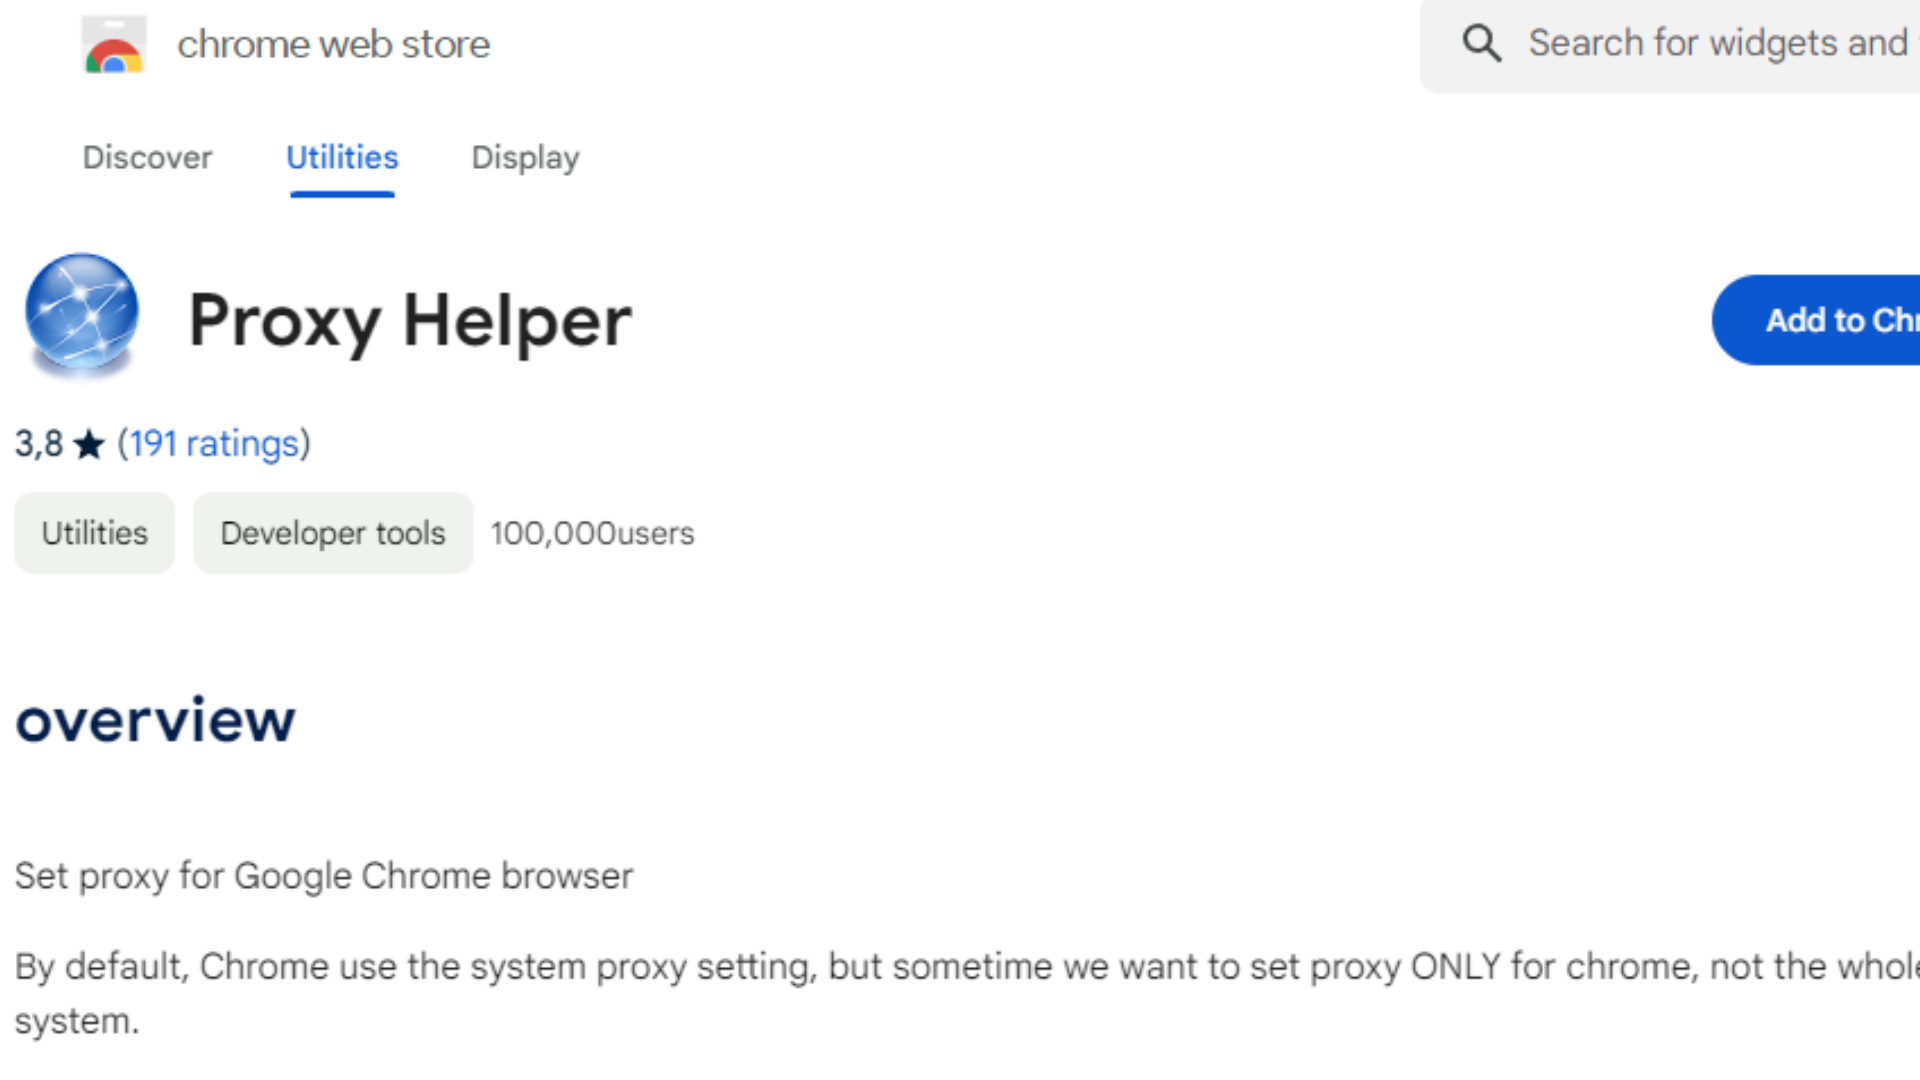 Installing Proxy Helper from the Chrome Web Store